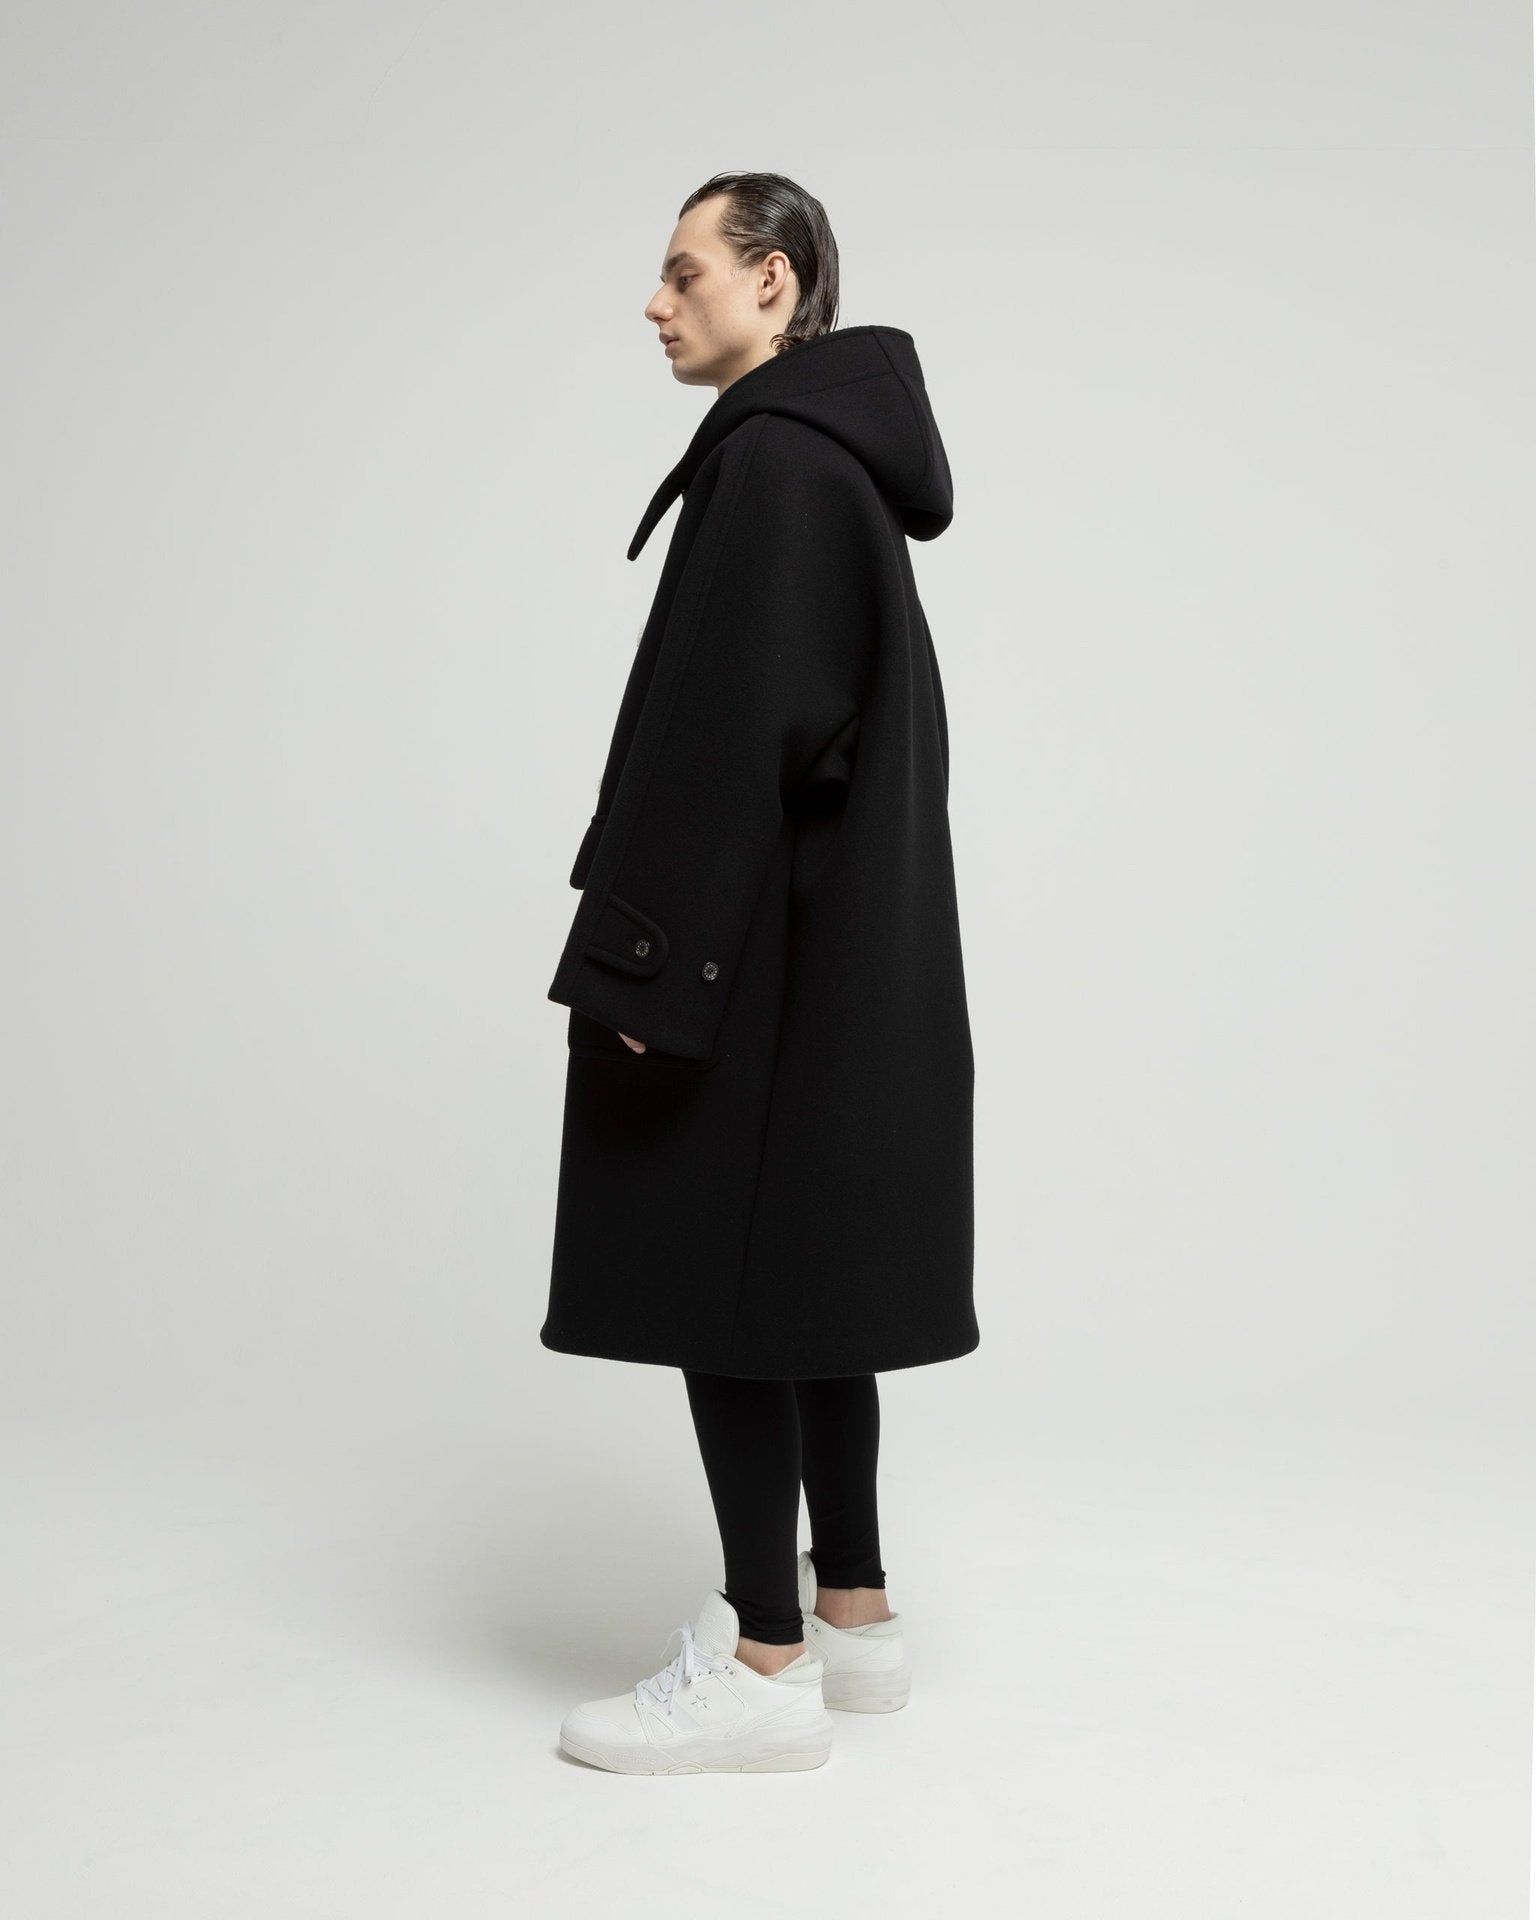 Vintage modern duffle coat – FUMITO GANRYU OFFICIAL STORE